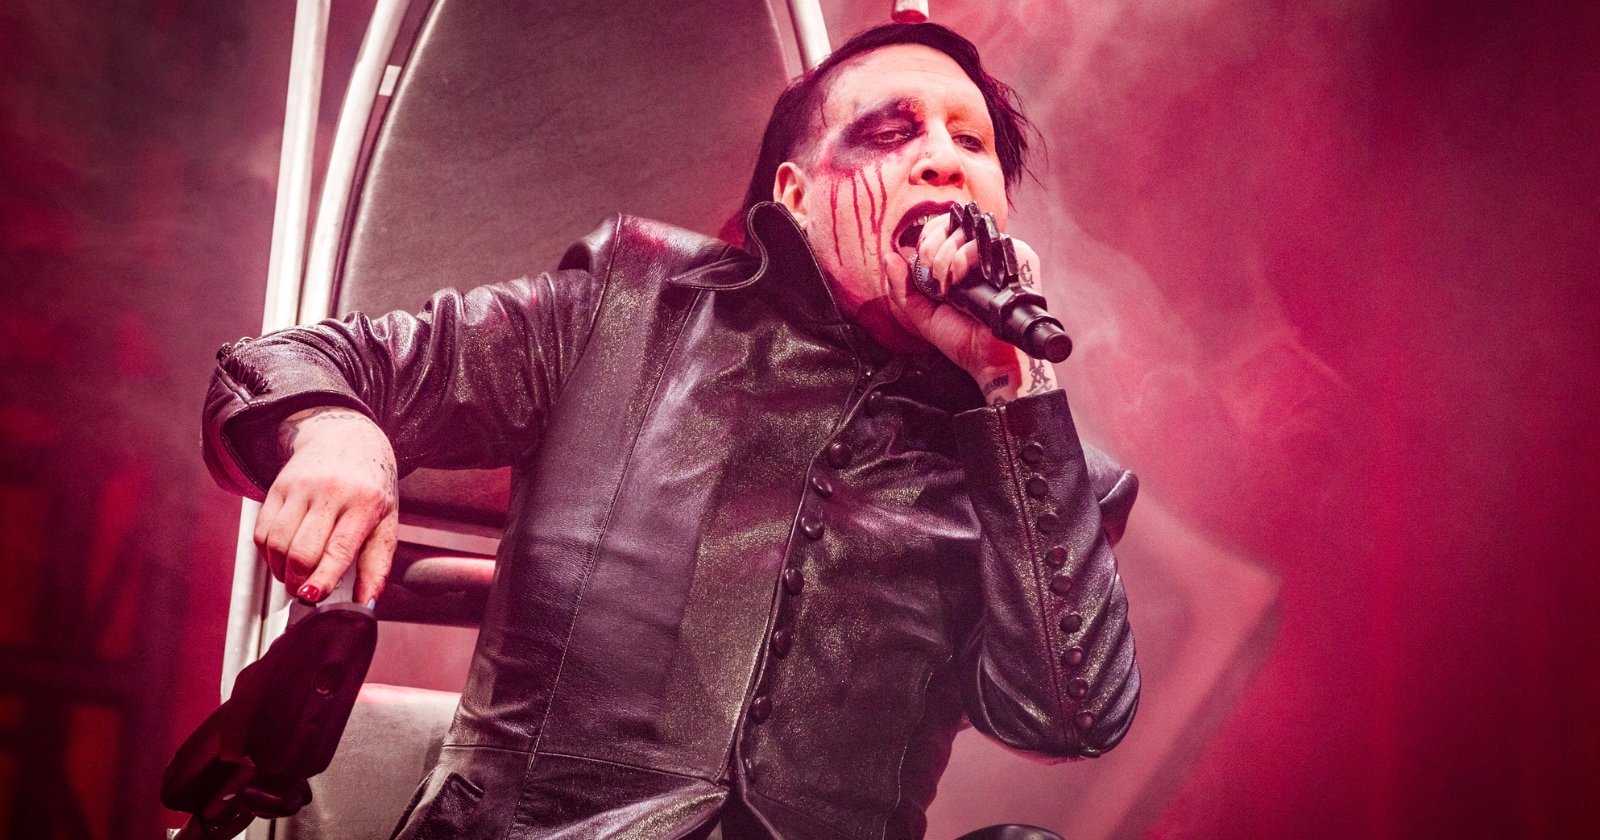 Camerawoman Sues Marilyn Manson For Spitting and Blowing Nose on Her